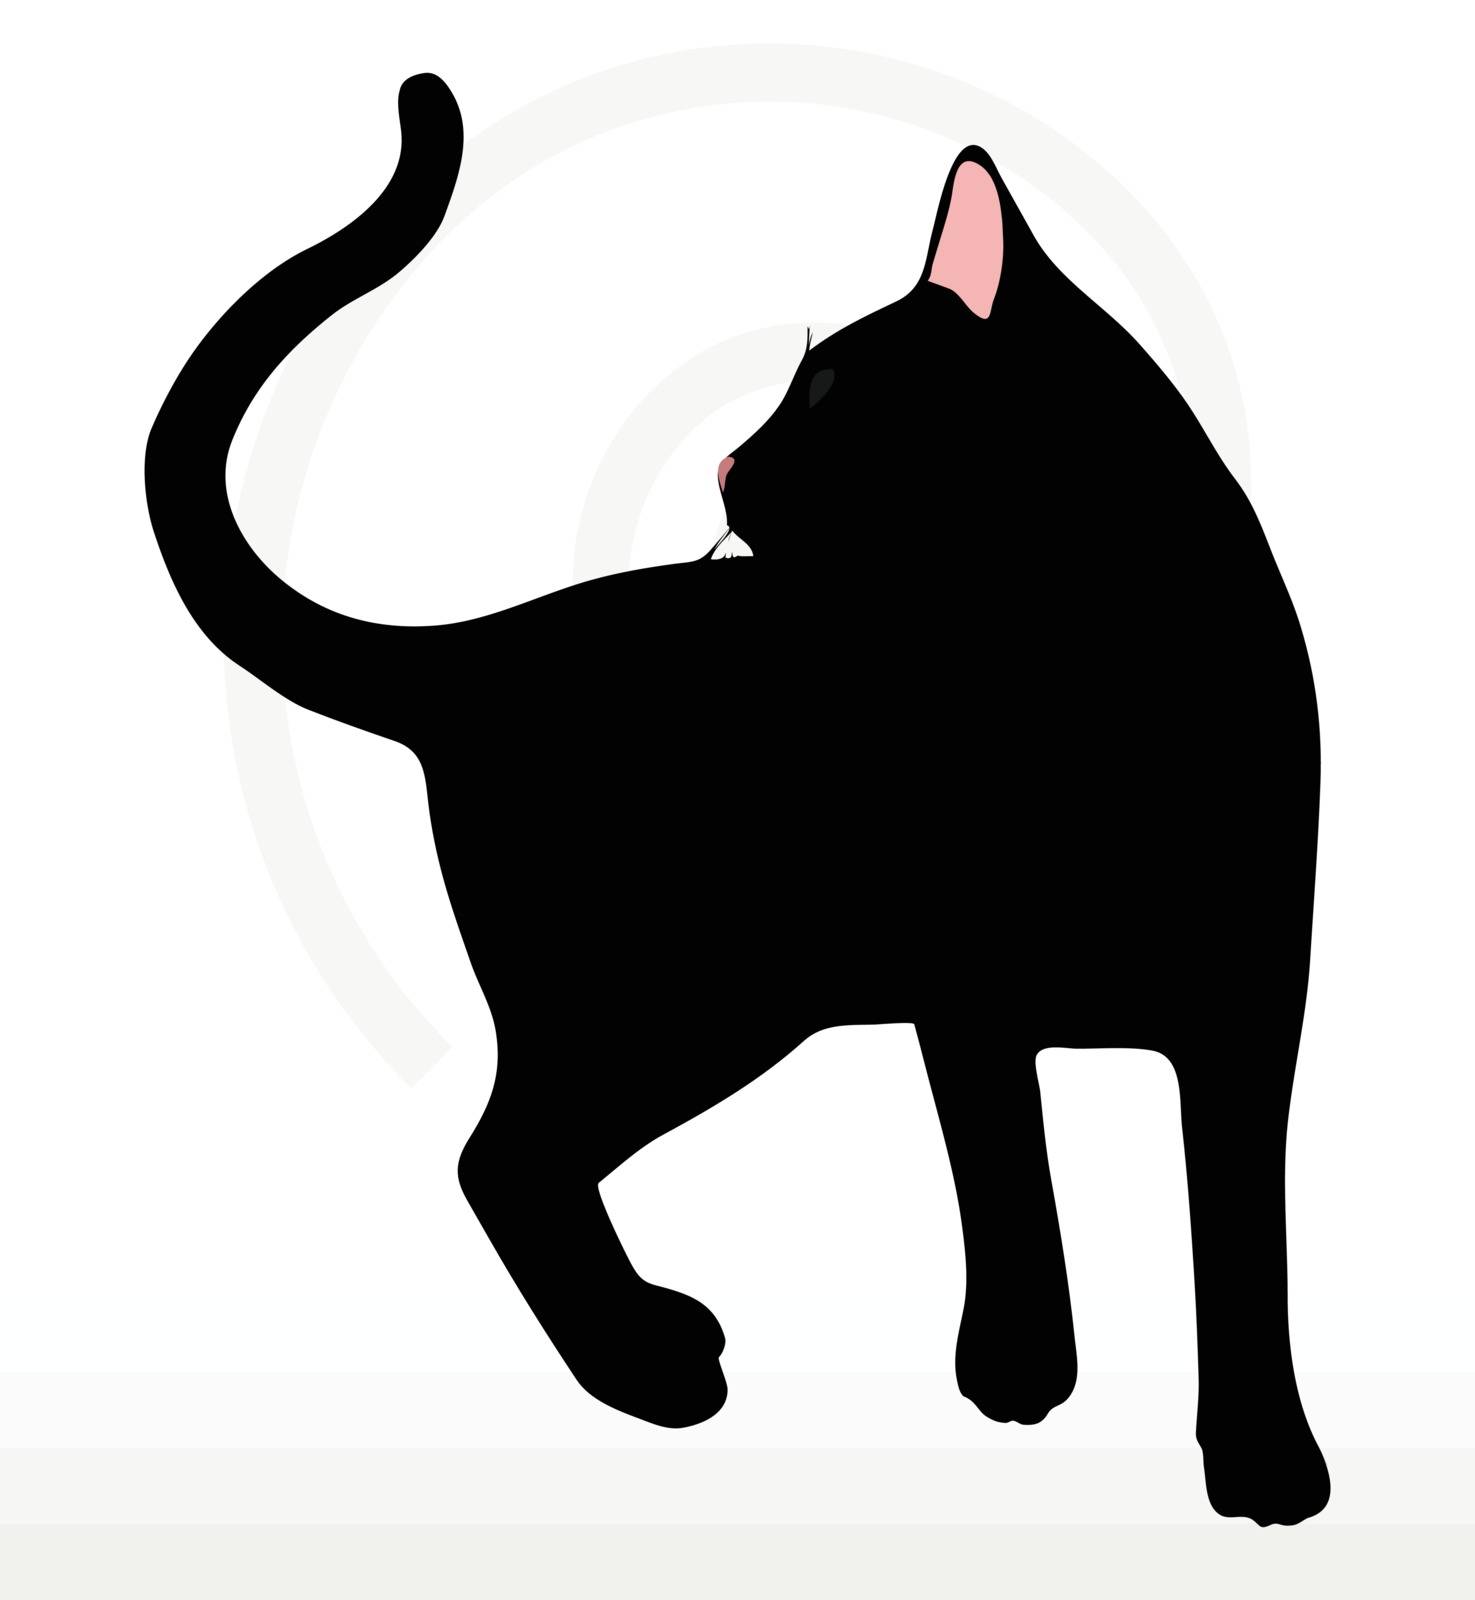 Vector Image - cat silhouette in Turn Around pose isolated on white background
